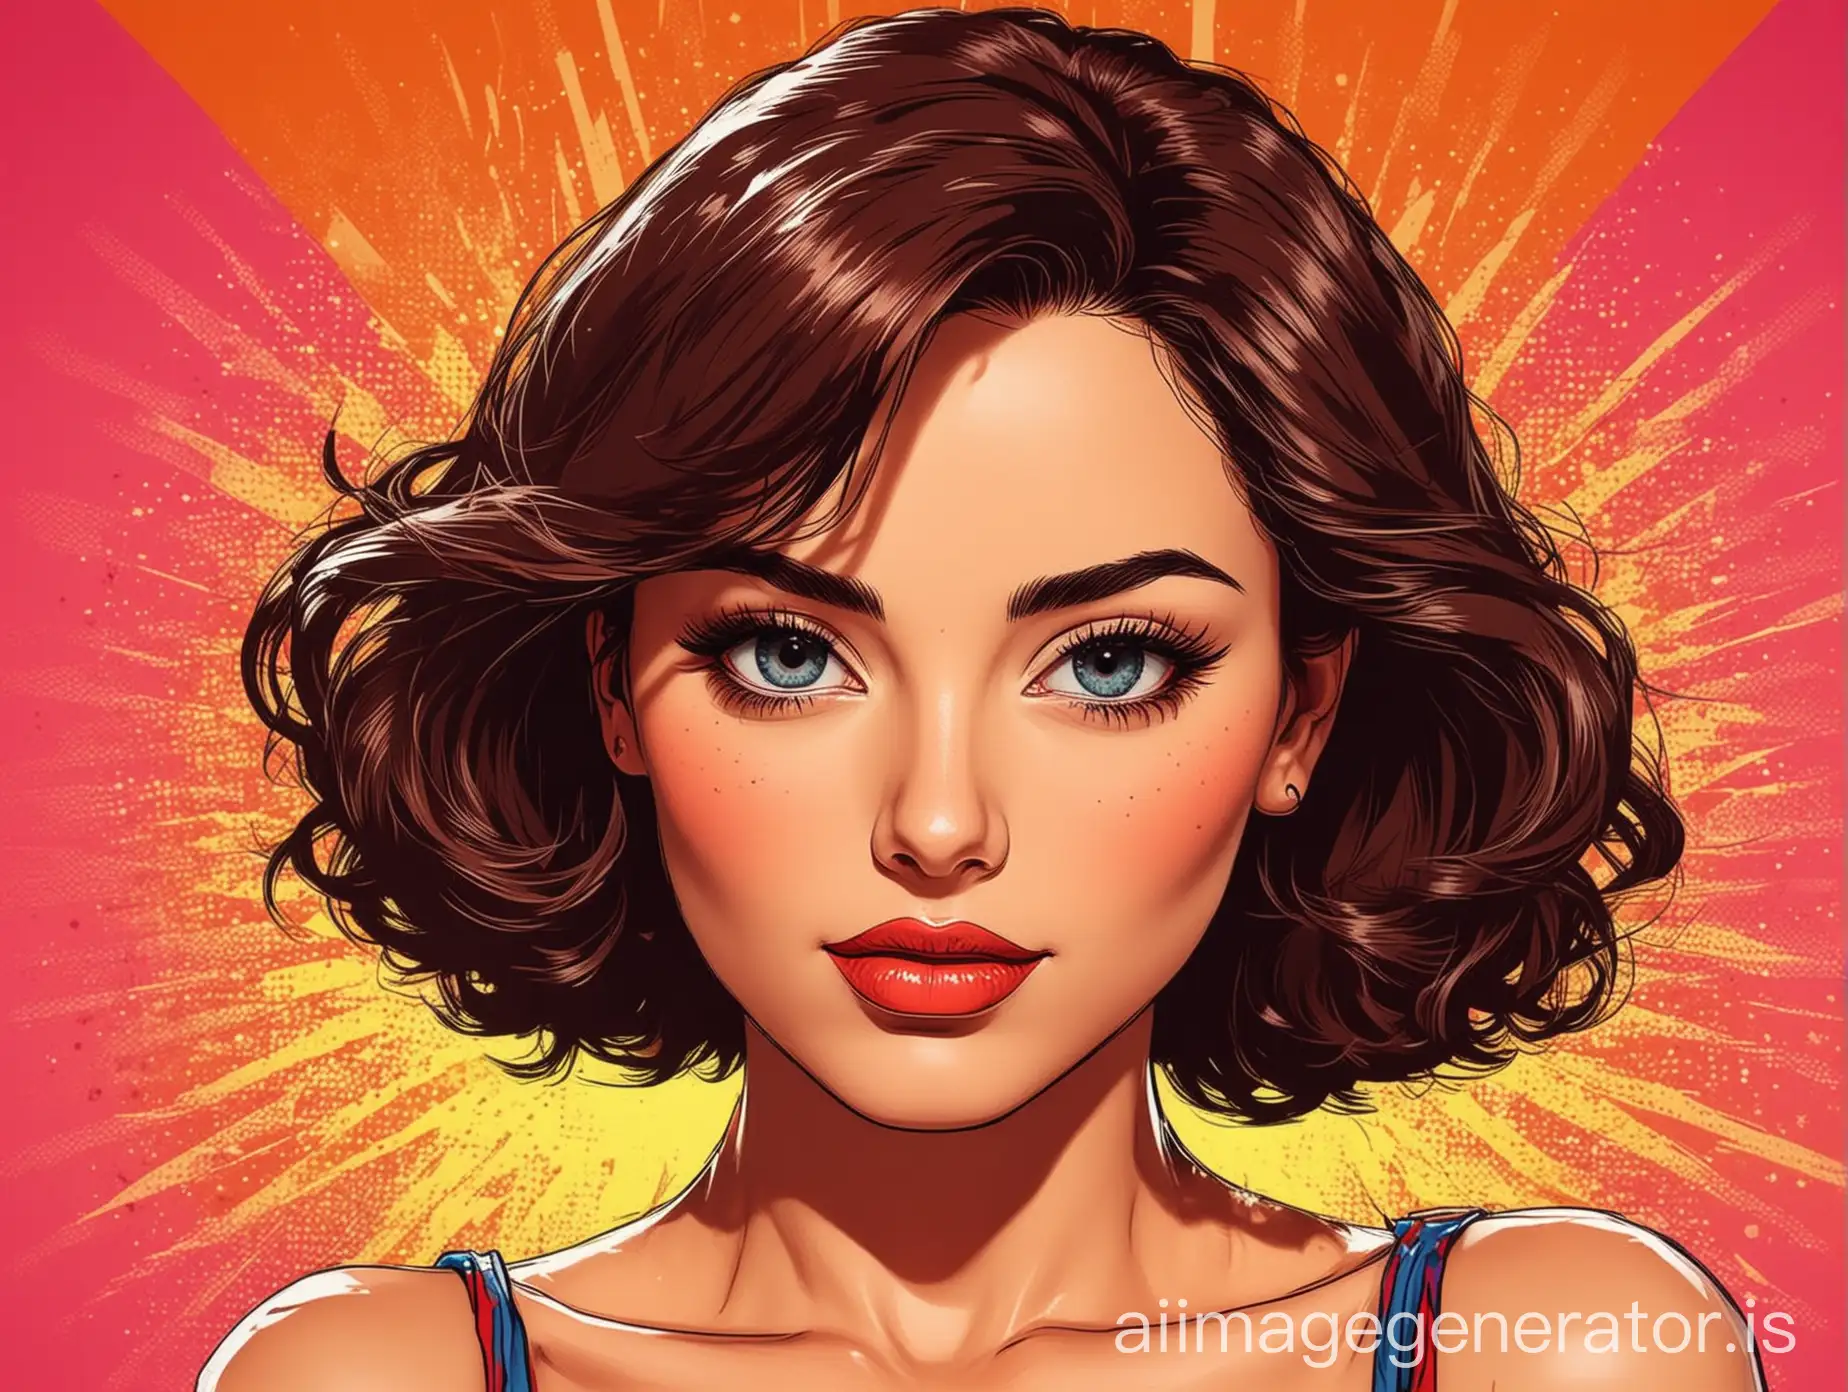  Beautiful woman 8k vector illustration in pop art style
(There's no need for translation as the input is already in English.)